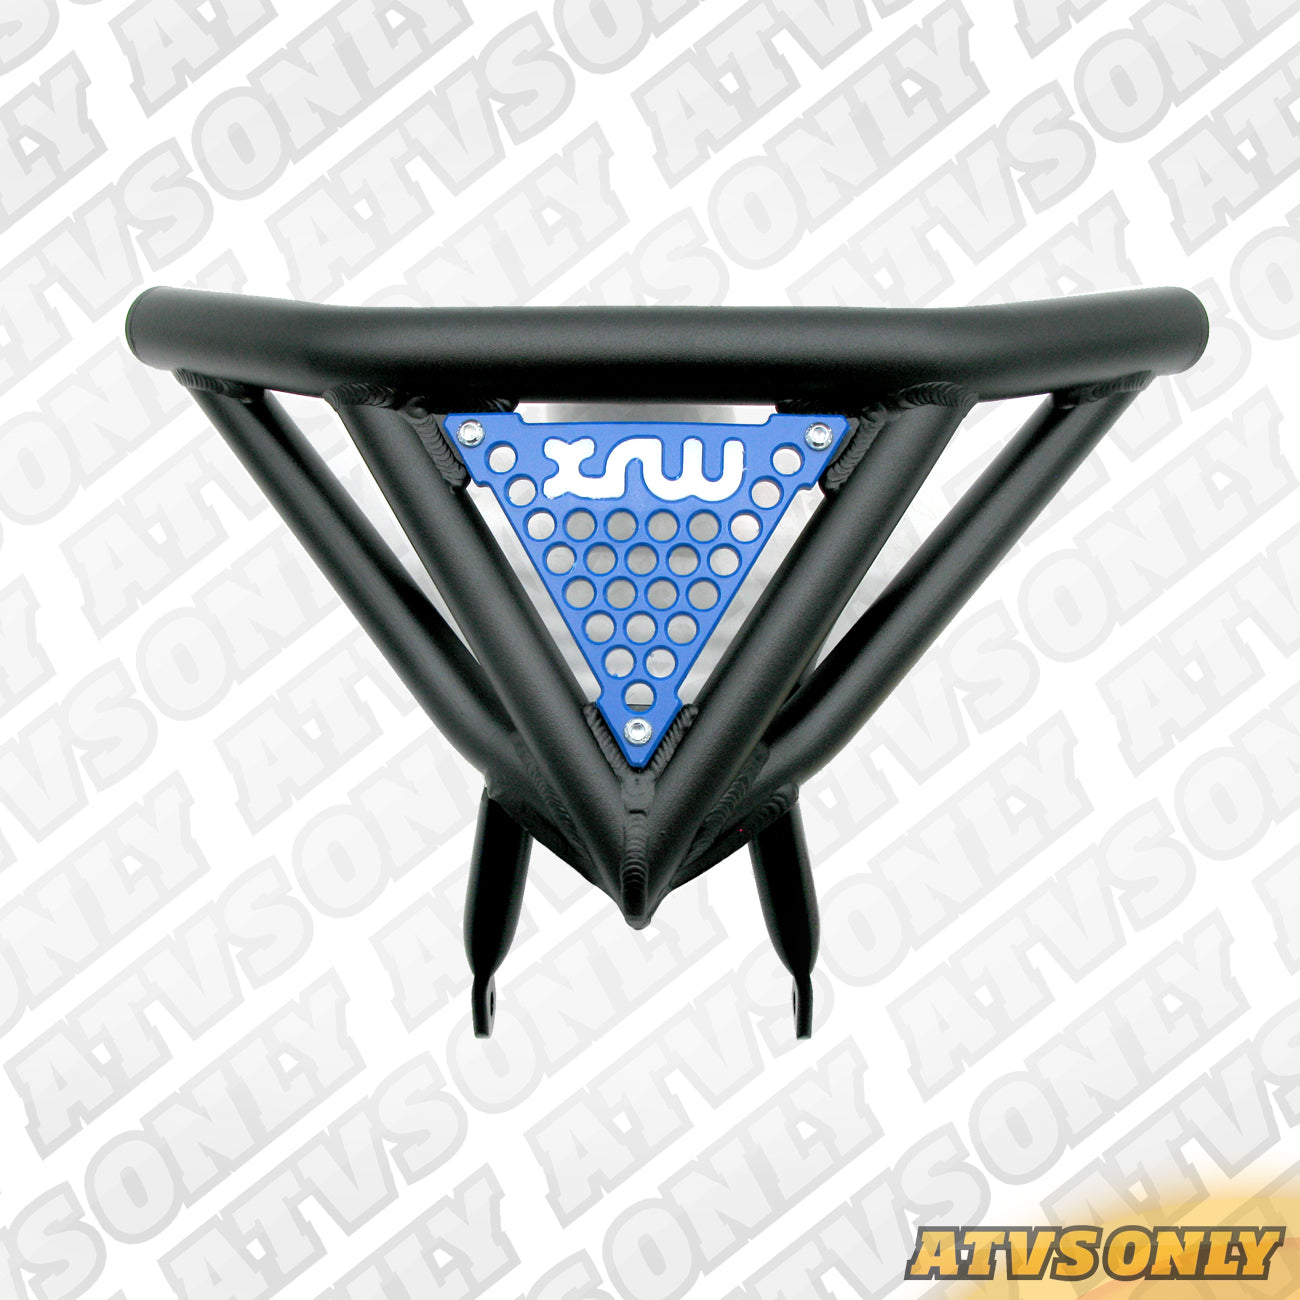 Bumpers - Front XR10 (Alloy) for Honda TRX450R